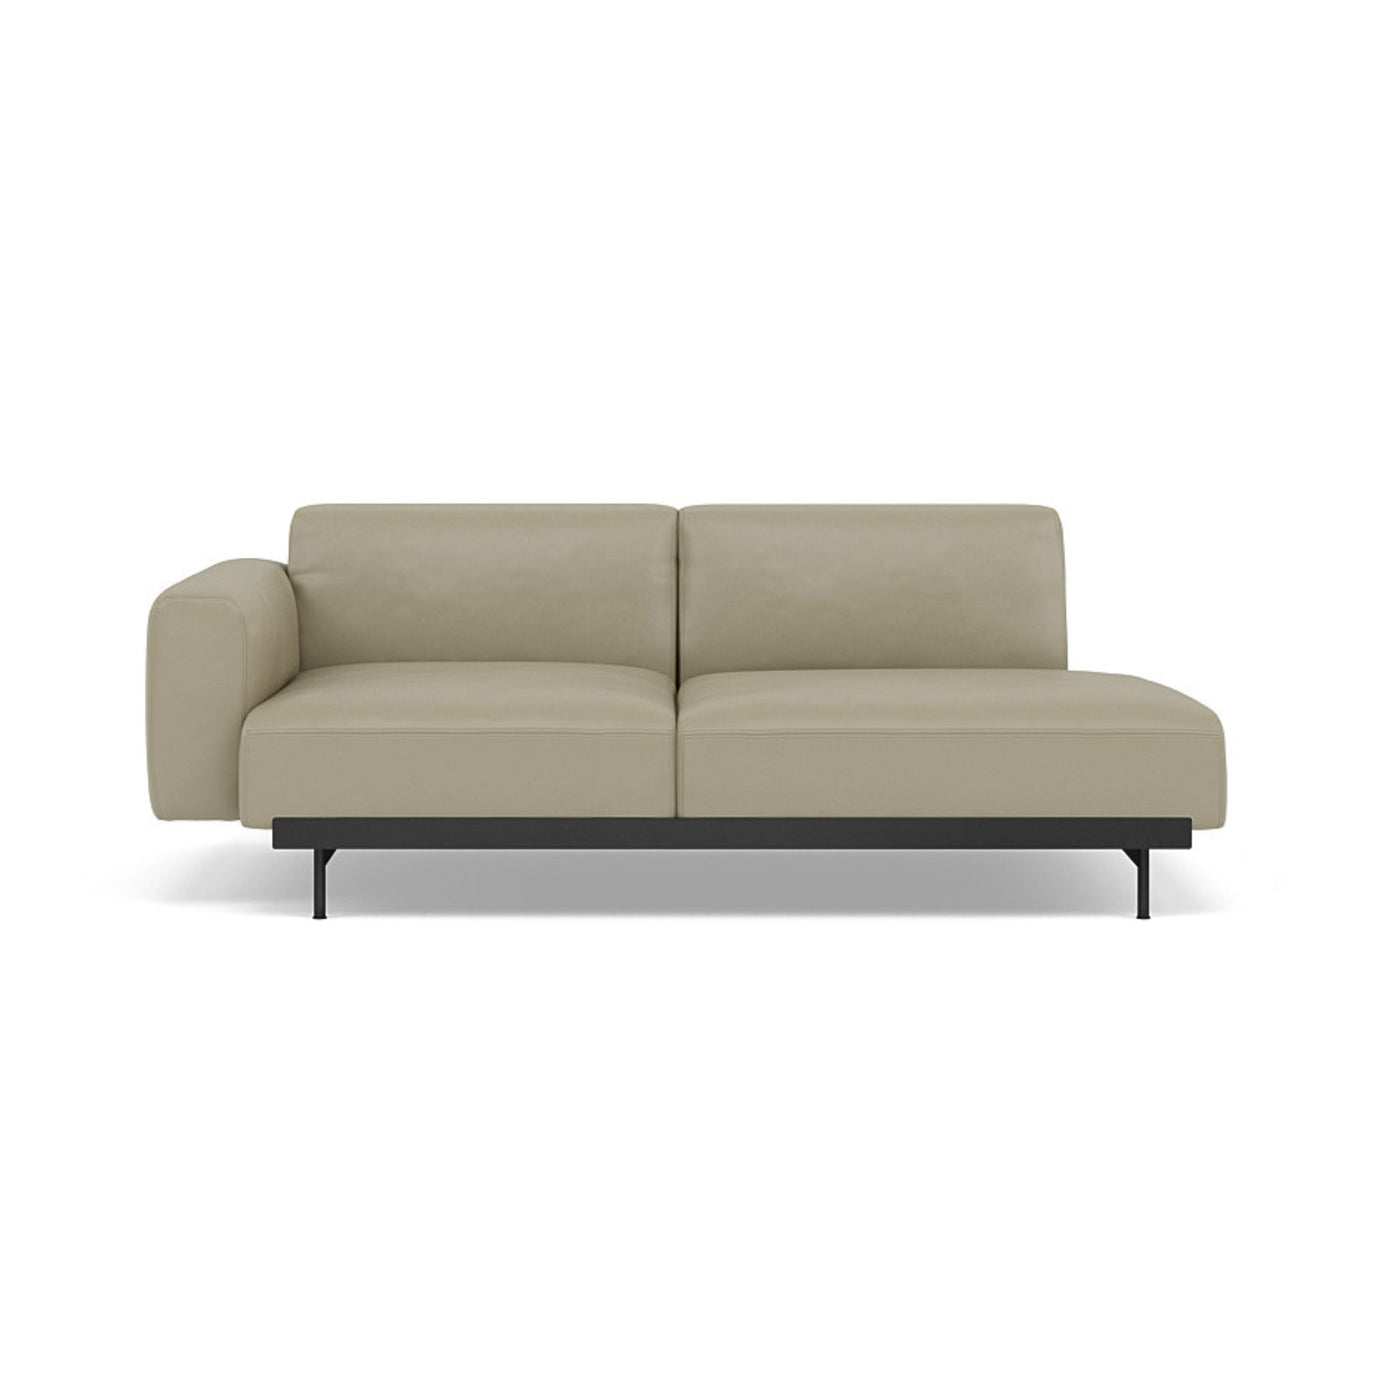 Muuto In Situ 2 Seater sofa in configuration 3. Made to order from someday designs. #colour_stone-refine-leather